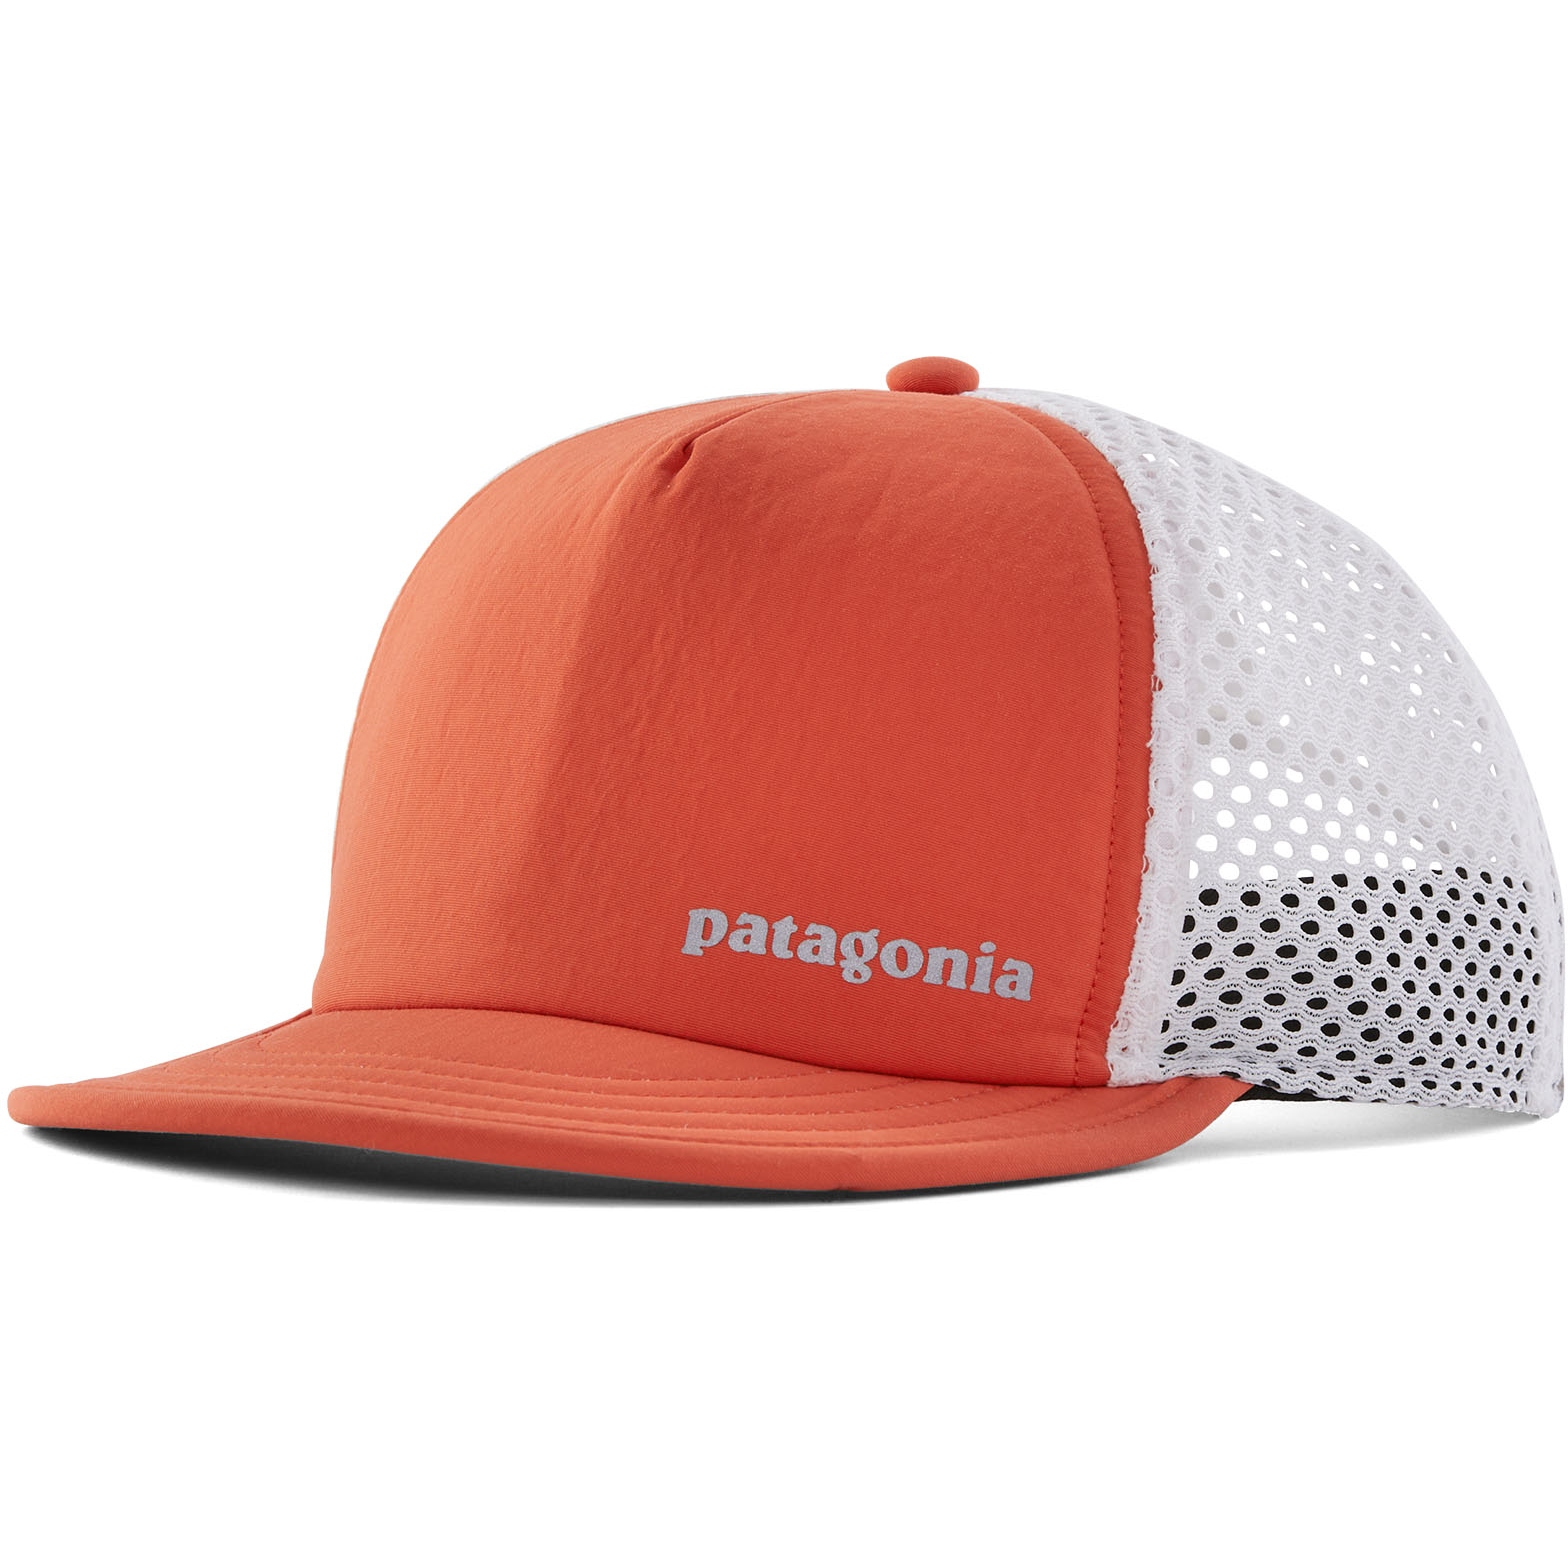 Productfoto van Patagonia Duckbill Shorty Trucker Pet - Pimento Red